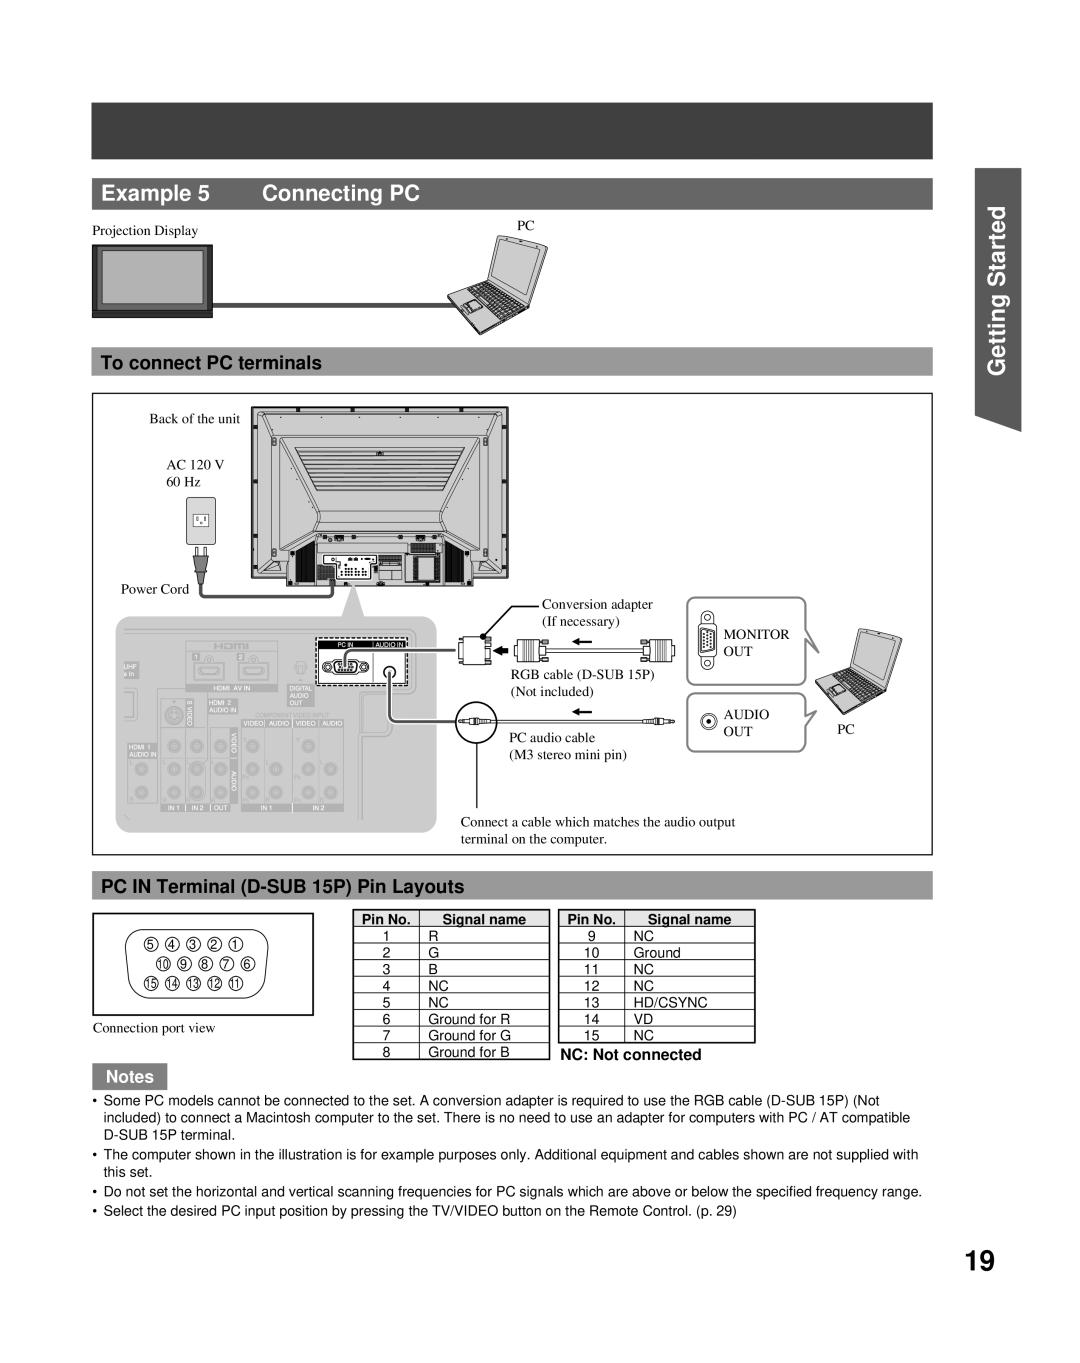 Panasonic PT-50LCZ70 Connecting PC, Example, To connect PC terminals, PC IN Terminal D-SUB 15P Pin Layouts 